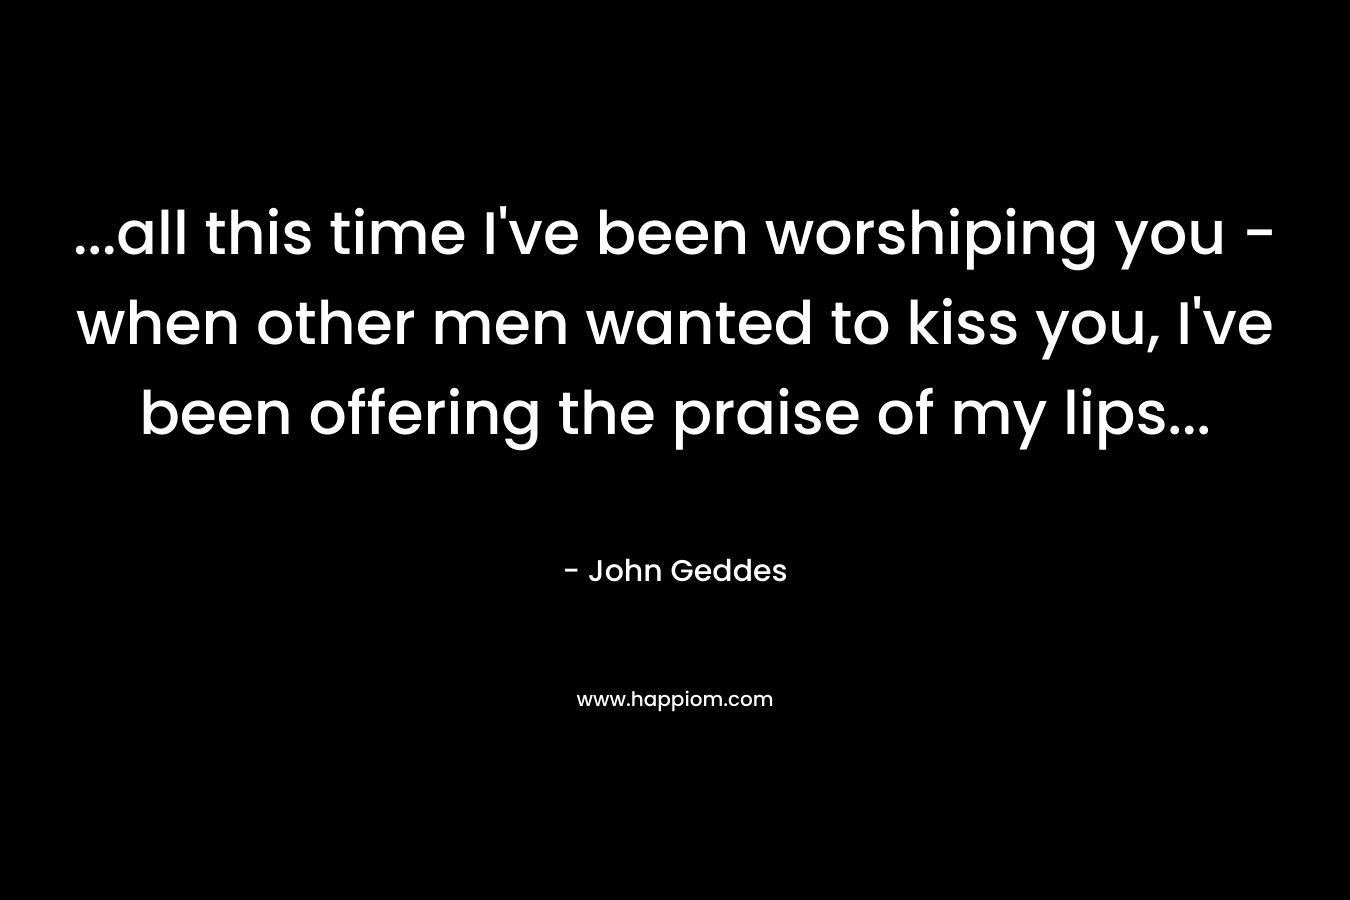 ...all this time I've been worshiping you - when other men wanted to kiss you, I've been offering the praise of my lips...